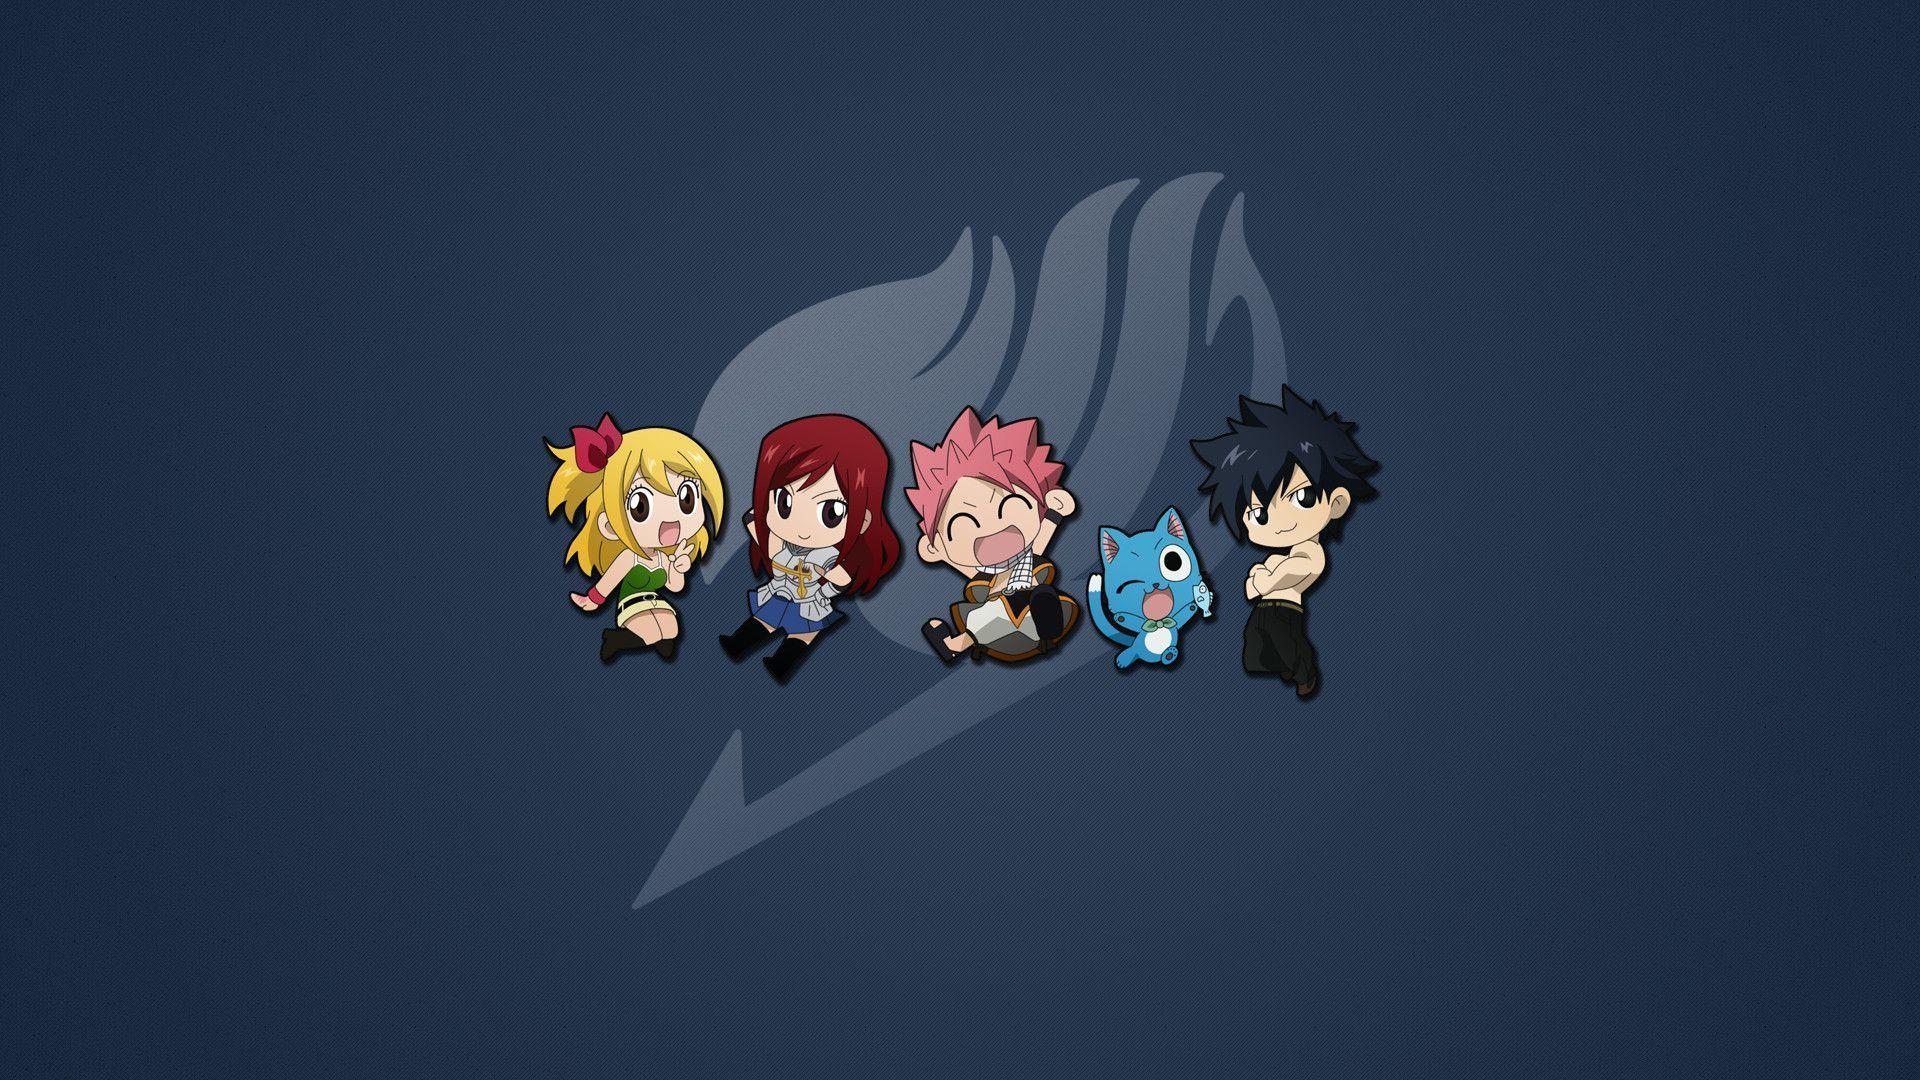 Fairy Tail Computer Wallpapers, Desktop Backgrounds 1920x1080 Id